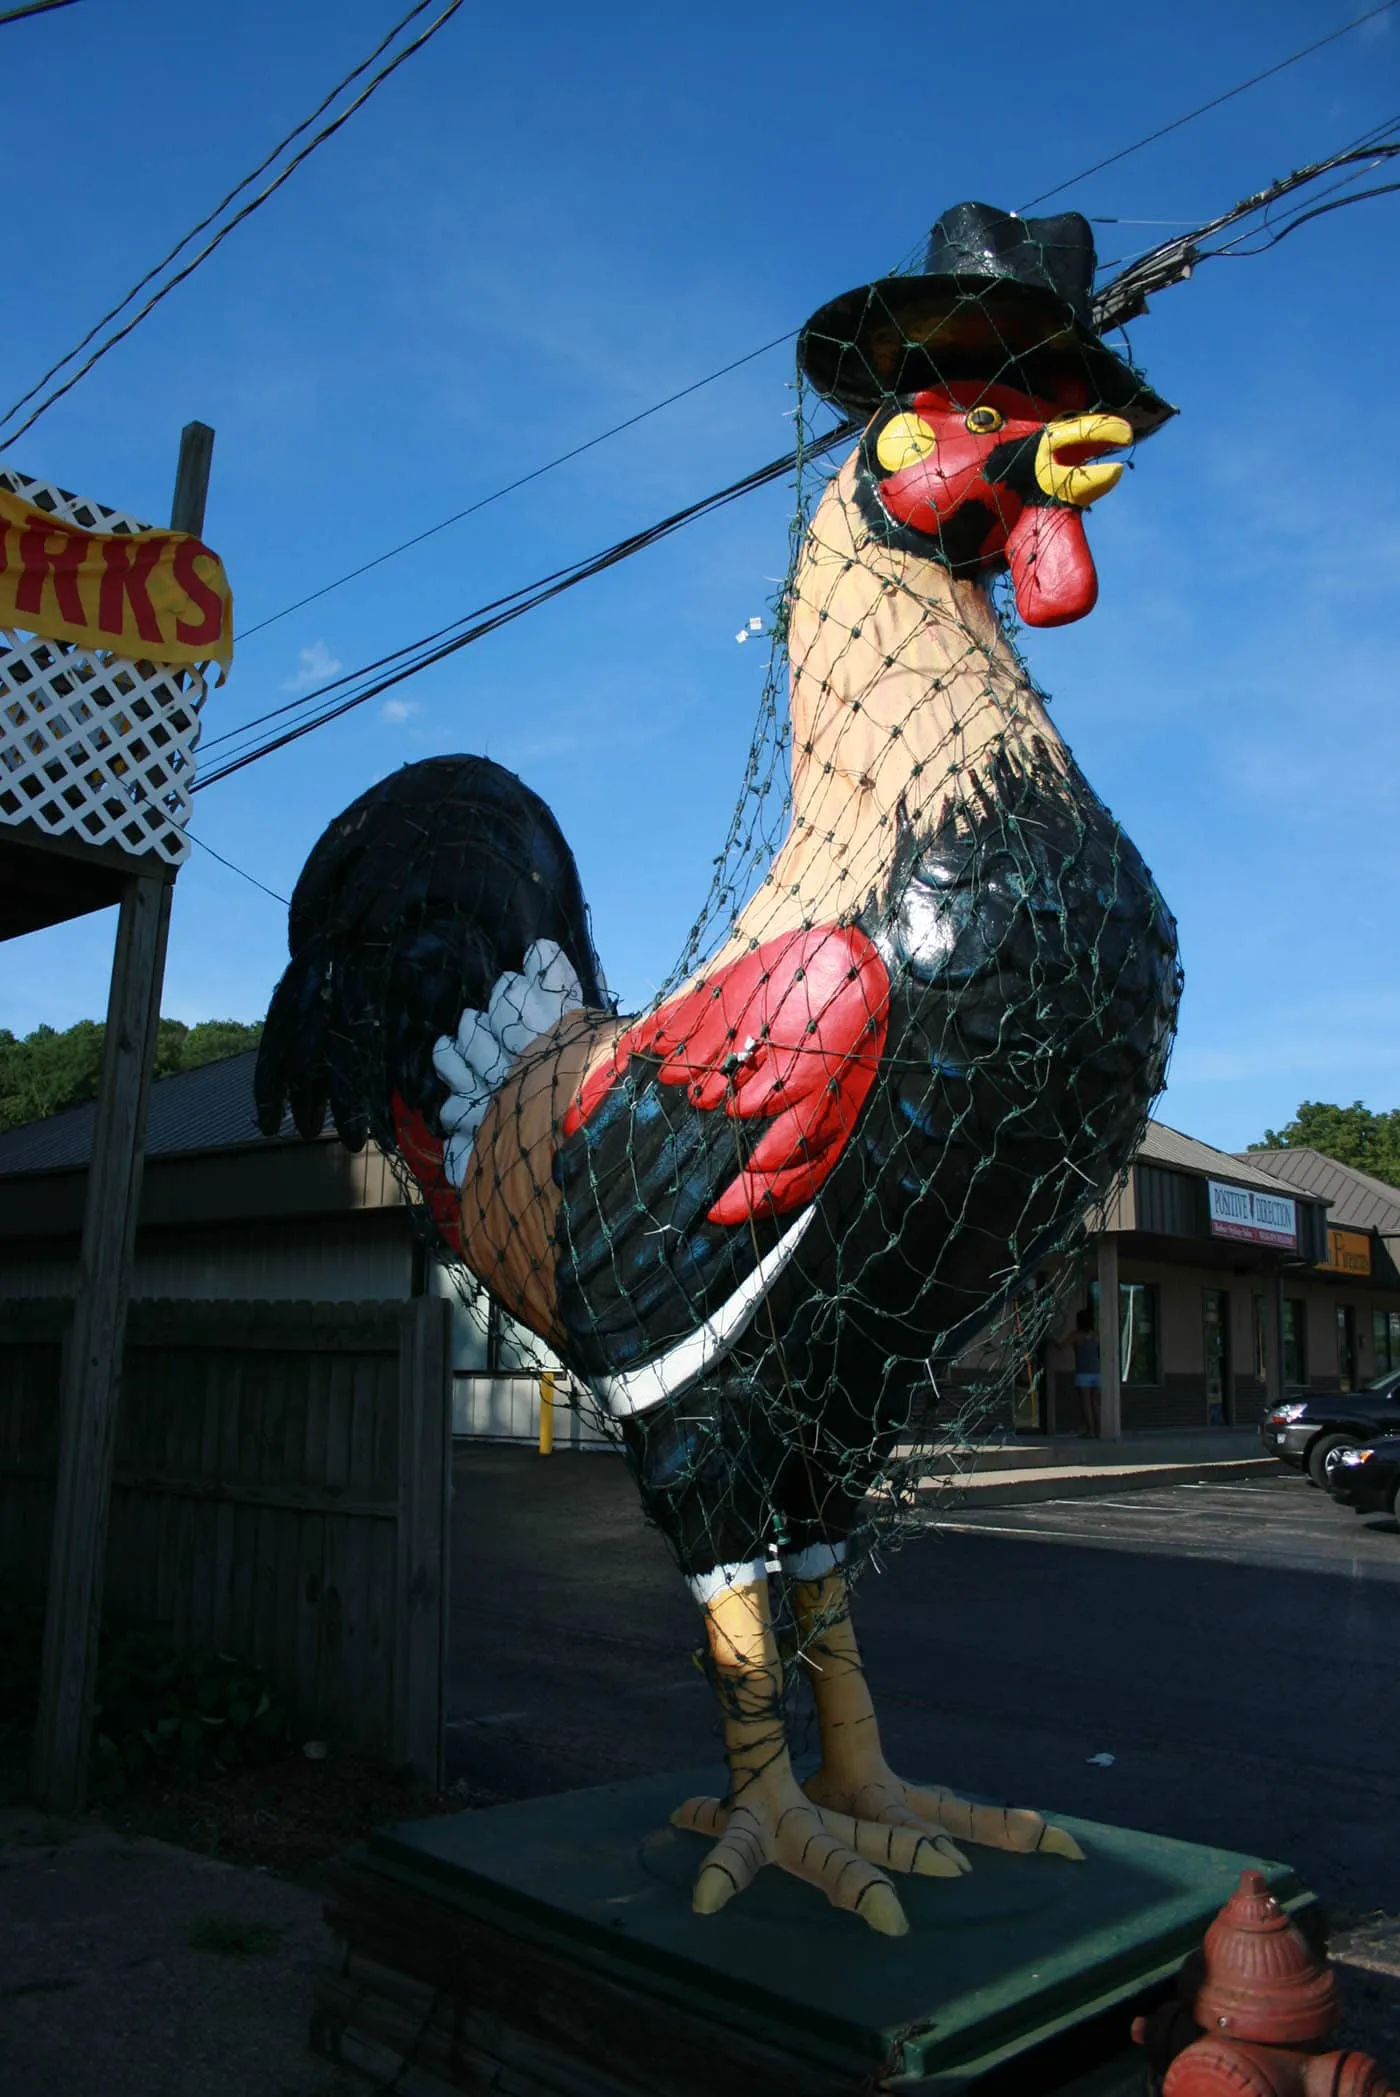 Giant Rooster in a top hat roadside attraction is a ten-foot tall statue that stands outside of Carl's Bakery in East Peoria, Illinois.